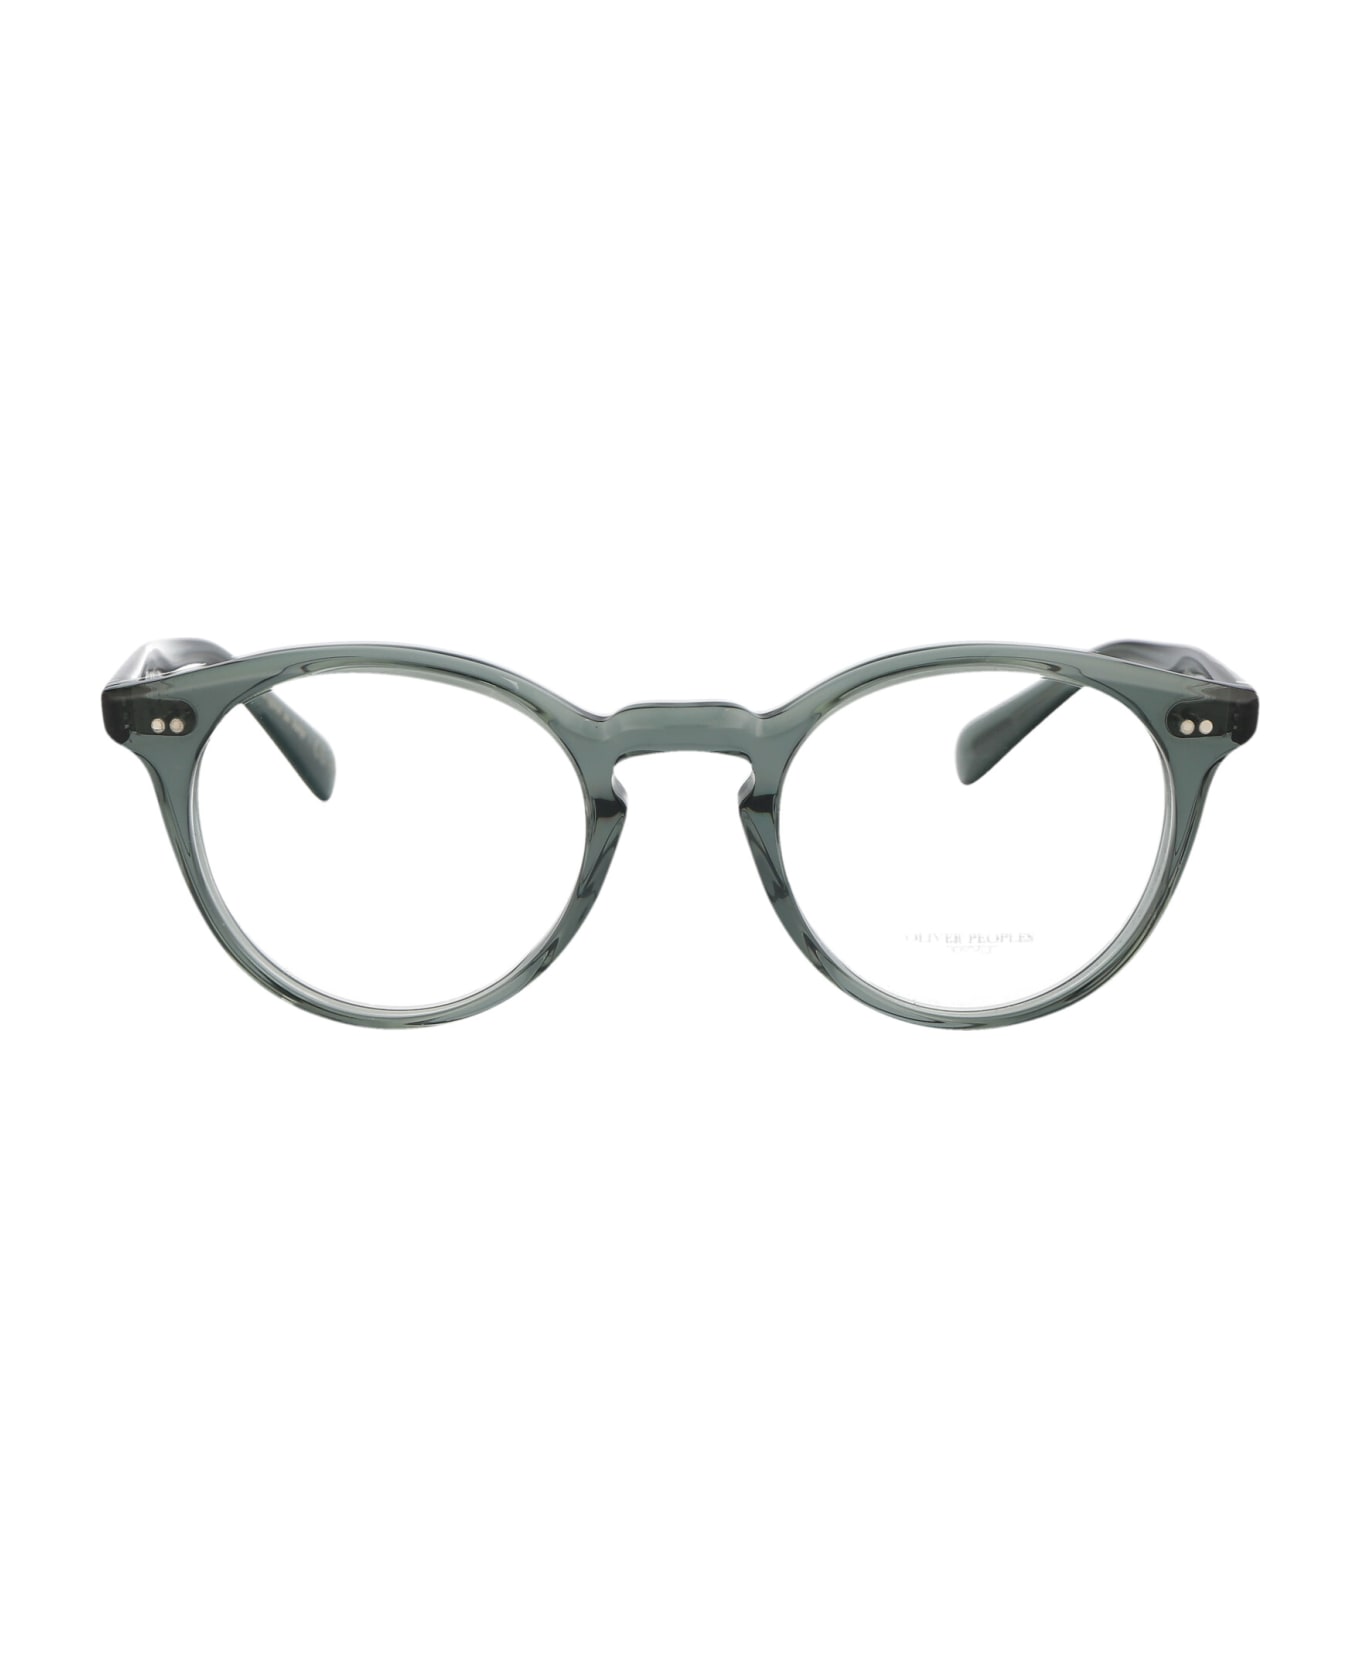 Oliver Peoples Romare Glasses - 1547 Ivy アイウェア